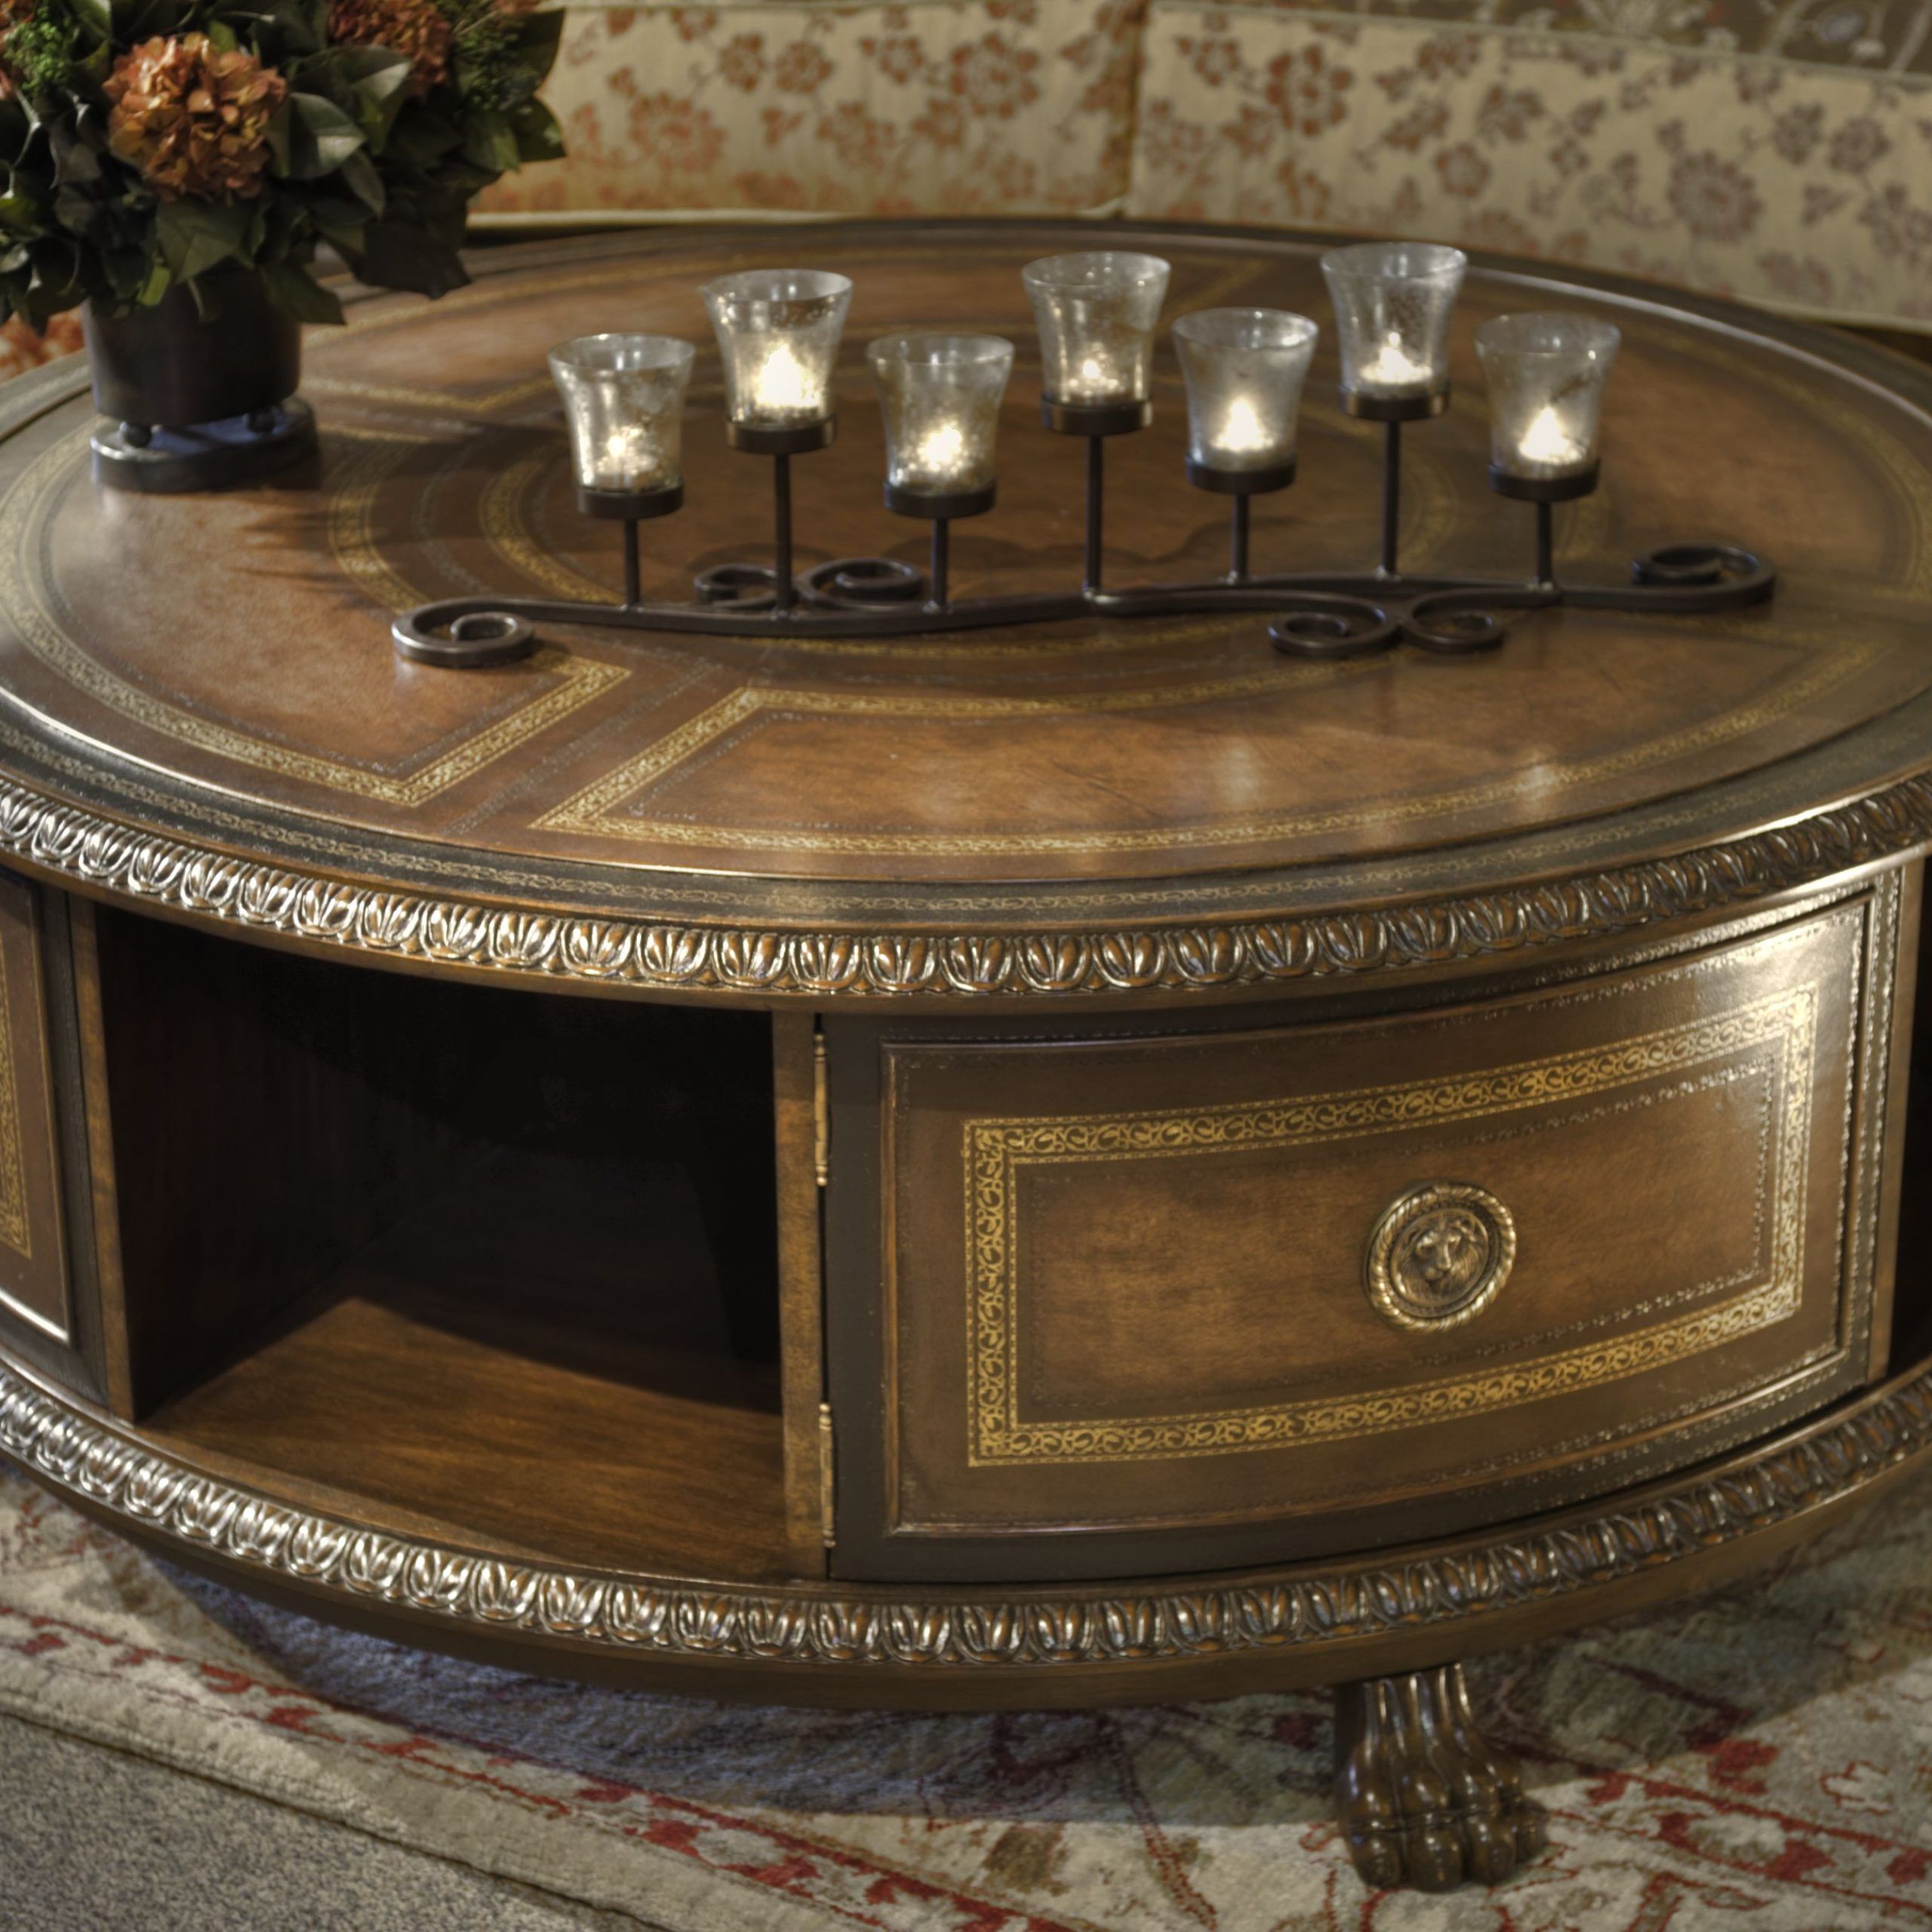 Swivel Round Coffee Table: This Unique Styled Coffee Table Has A Gentle Within Round Coffee Tables With Storage (Gallery 18 of 20)